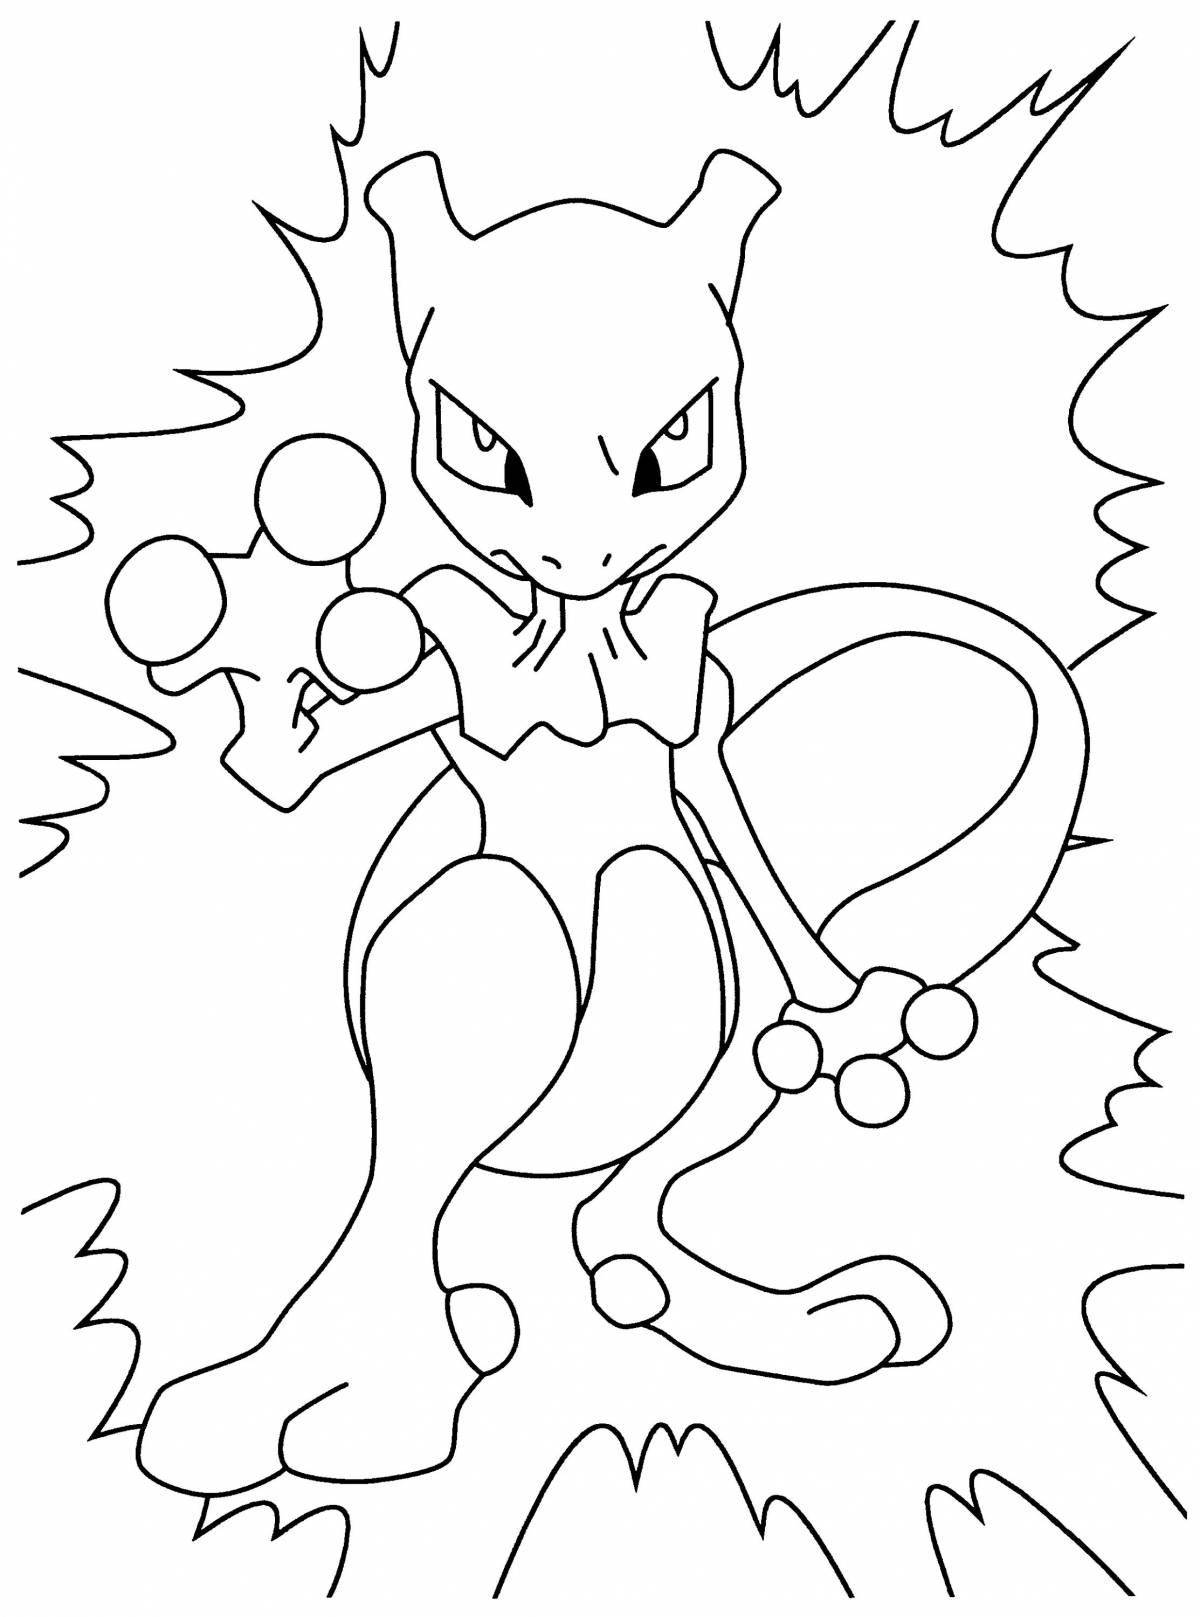 Adorable Silent Pokemon Coloring Page